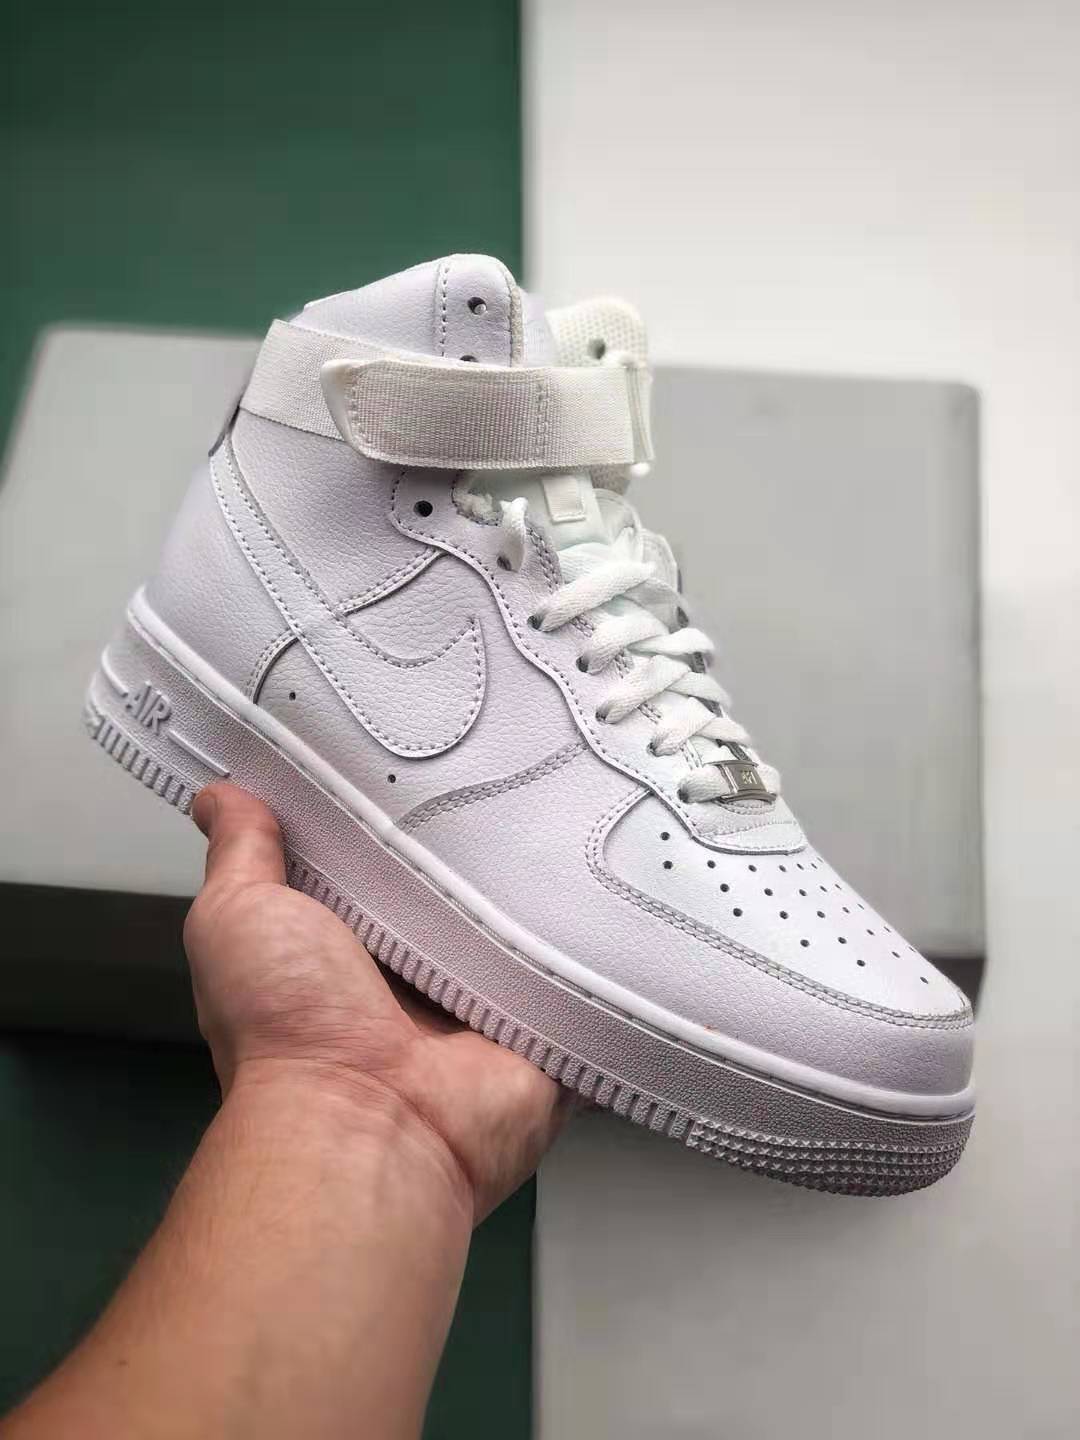 Nike Air Force 1 High '07 'White' 315121-115 - Classic Design with Modern Comfort